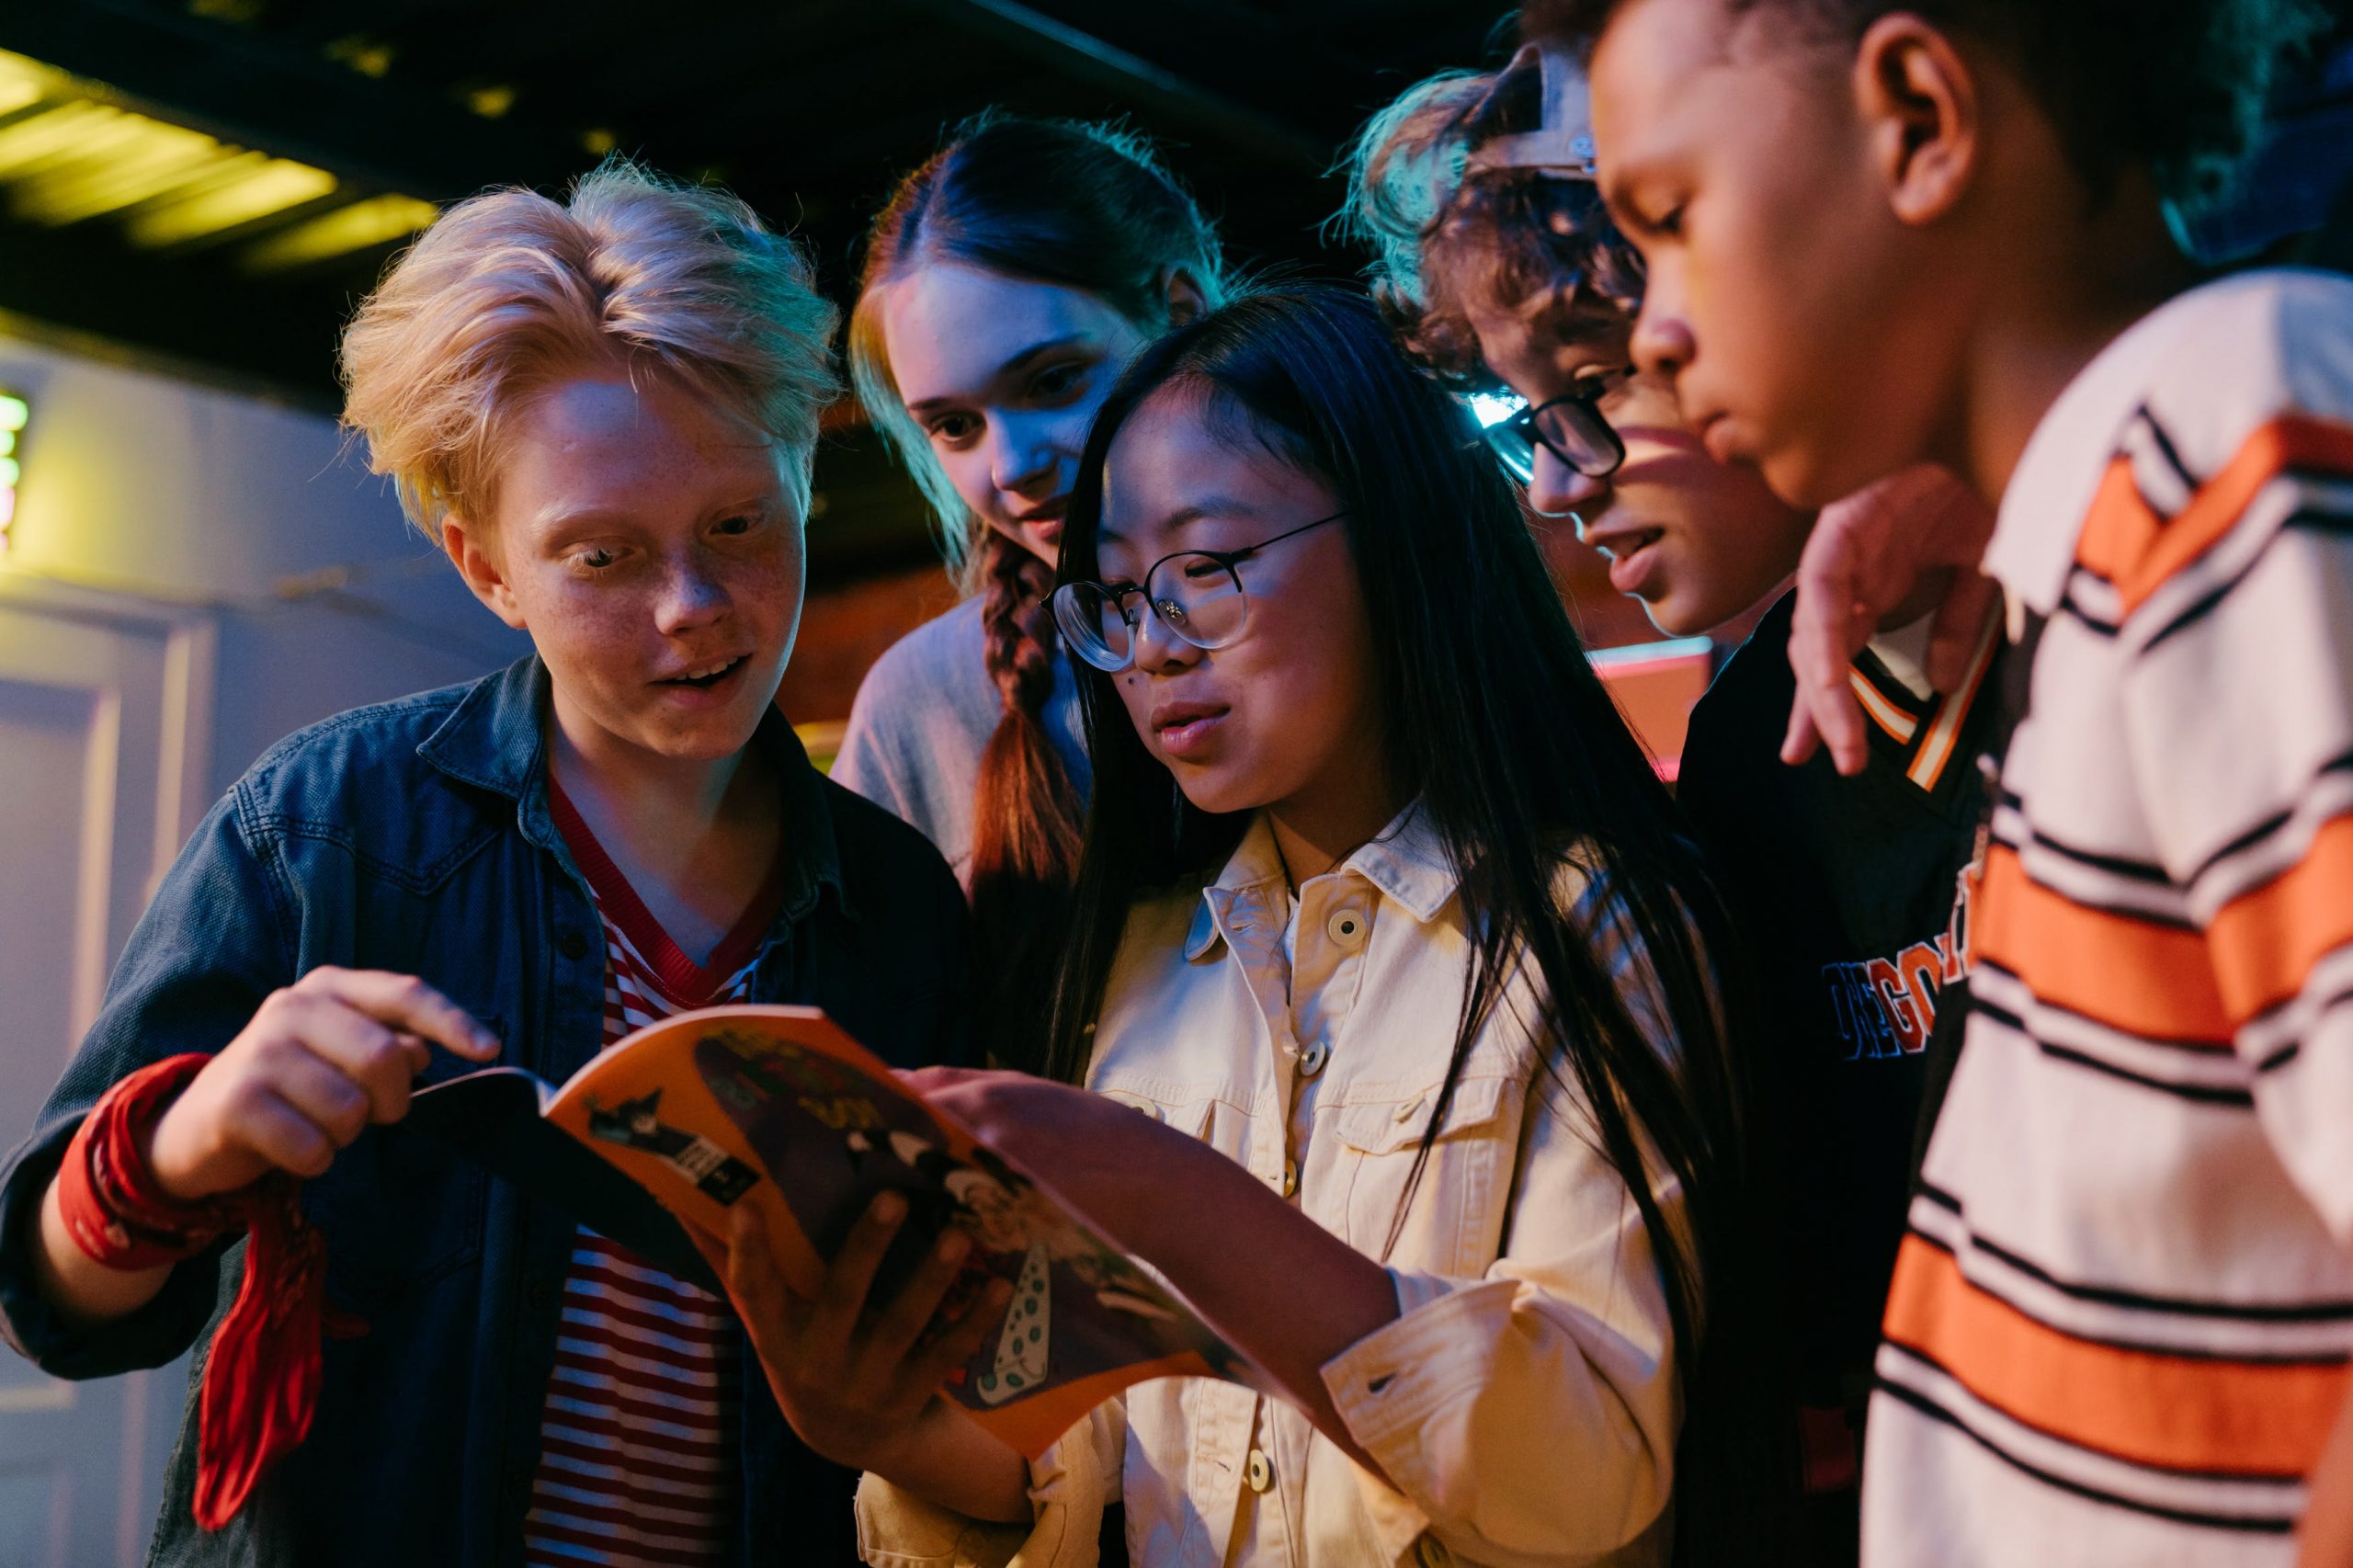 A diverse group of teenagers engaged in reading a comic book together in colorful lighting. 